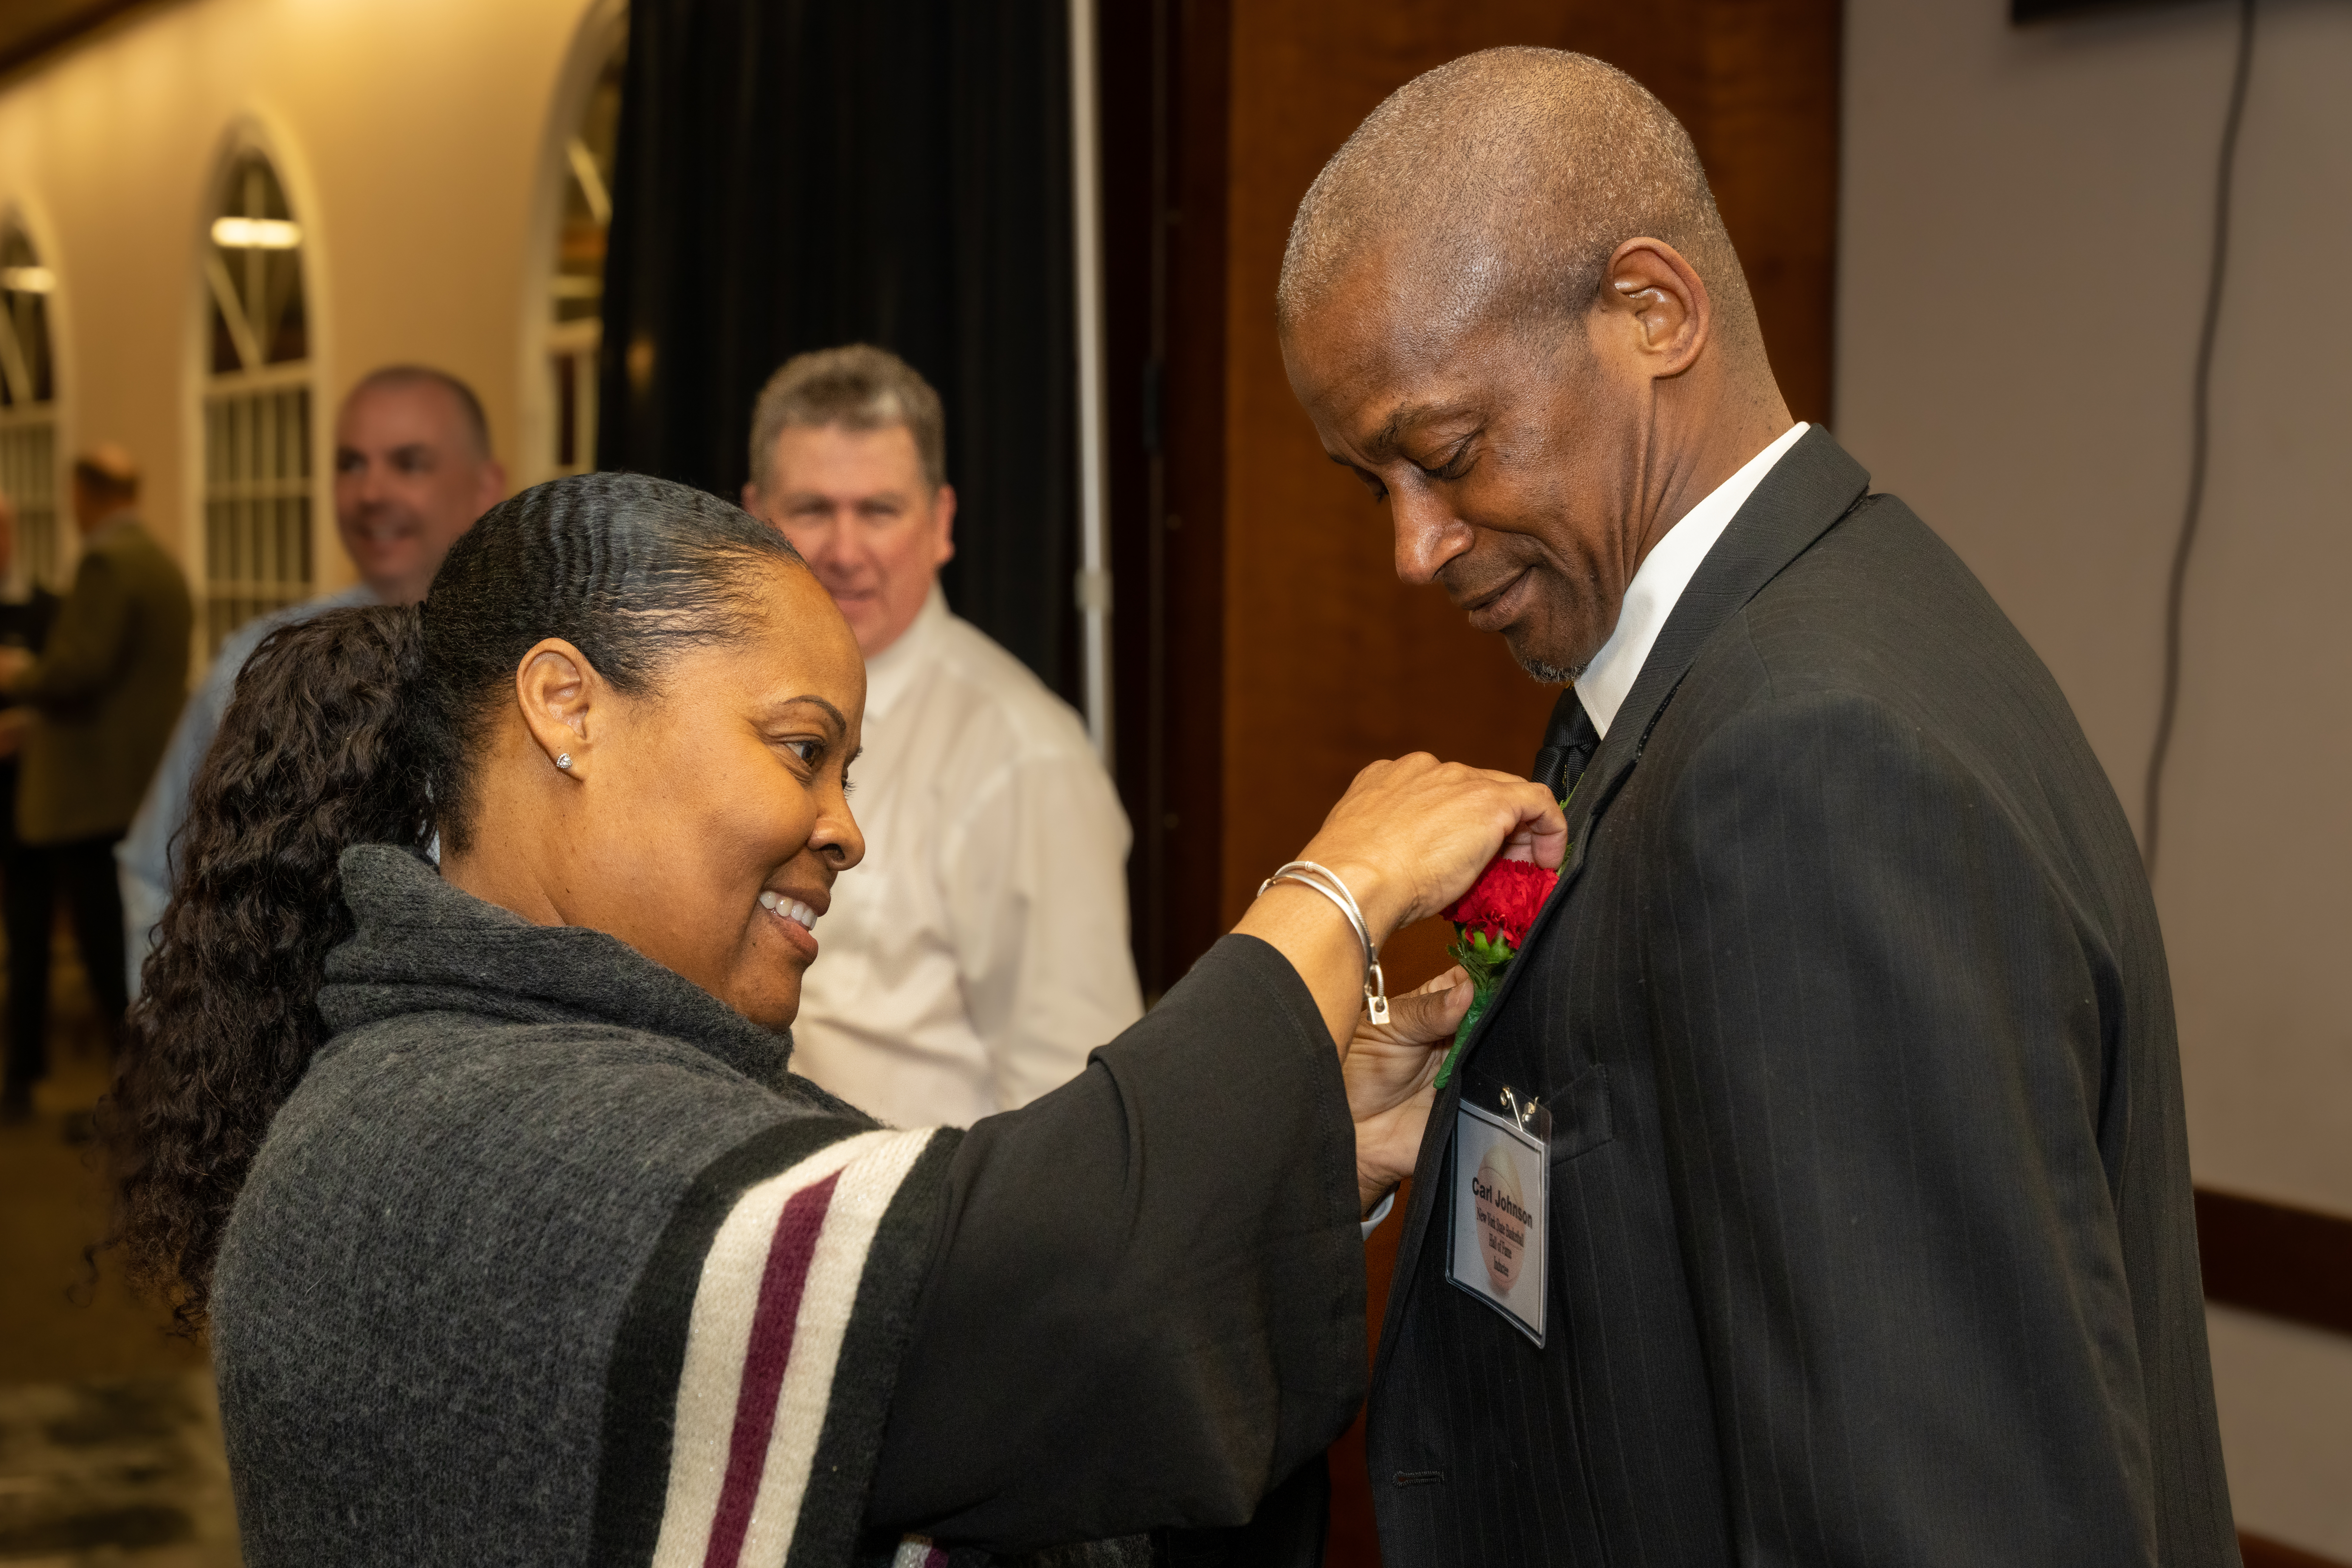 Aleta Parker puts a boutonniere on the lapel of her cousin Carl Johnson who was inducted into the New York State Basketball Hall of Fame on Sunday in Glens Falls.    RON ESPOSITO